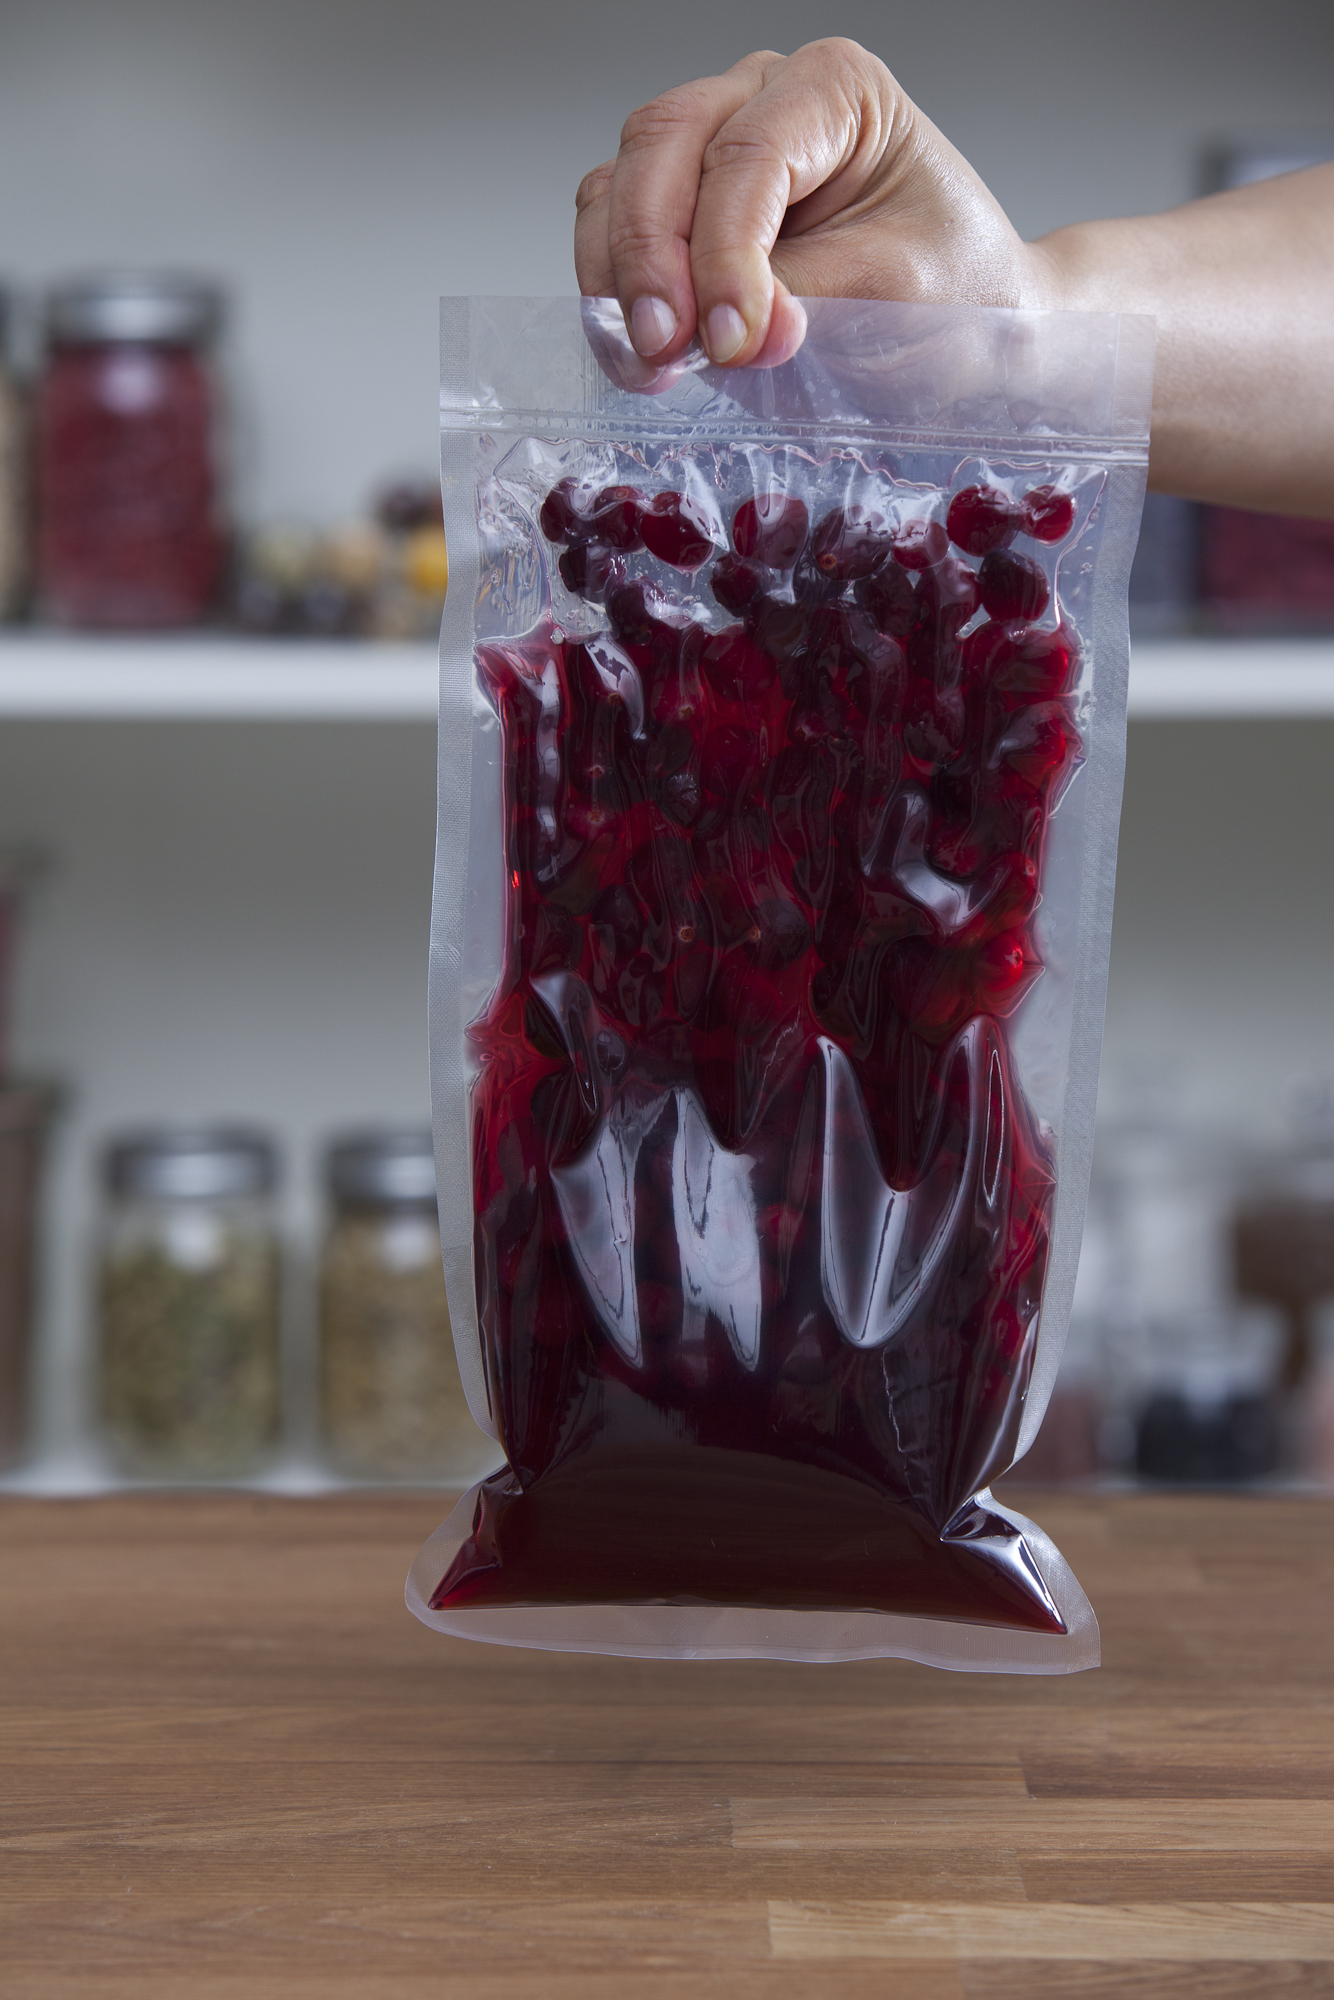 Because you do not want your cranberries to burst like they do when making a traditional sauce, the gentleness of sous vide cooking is ideal.